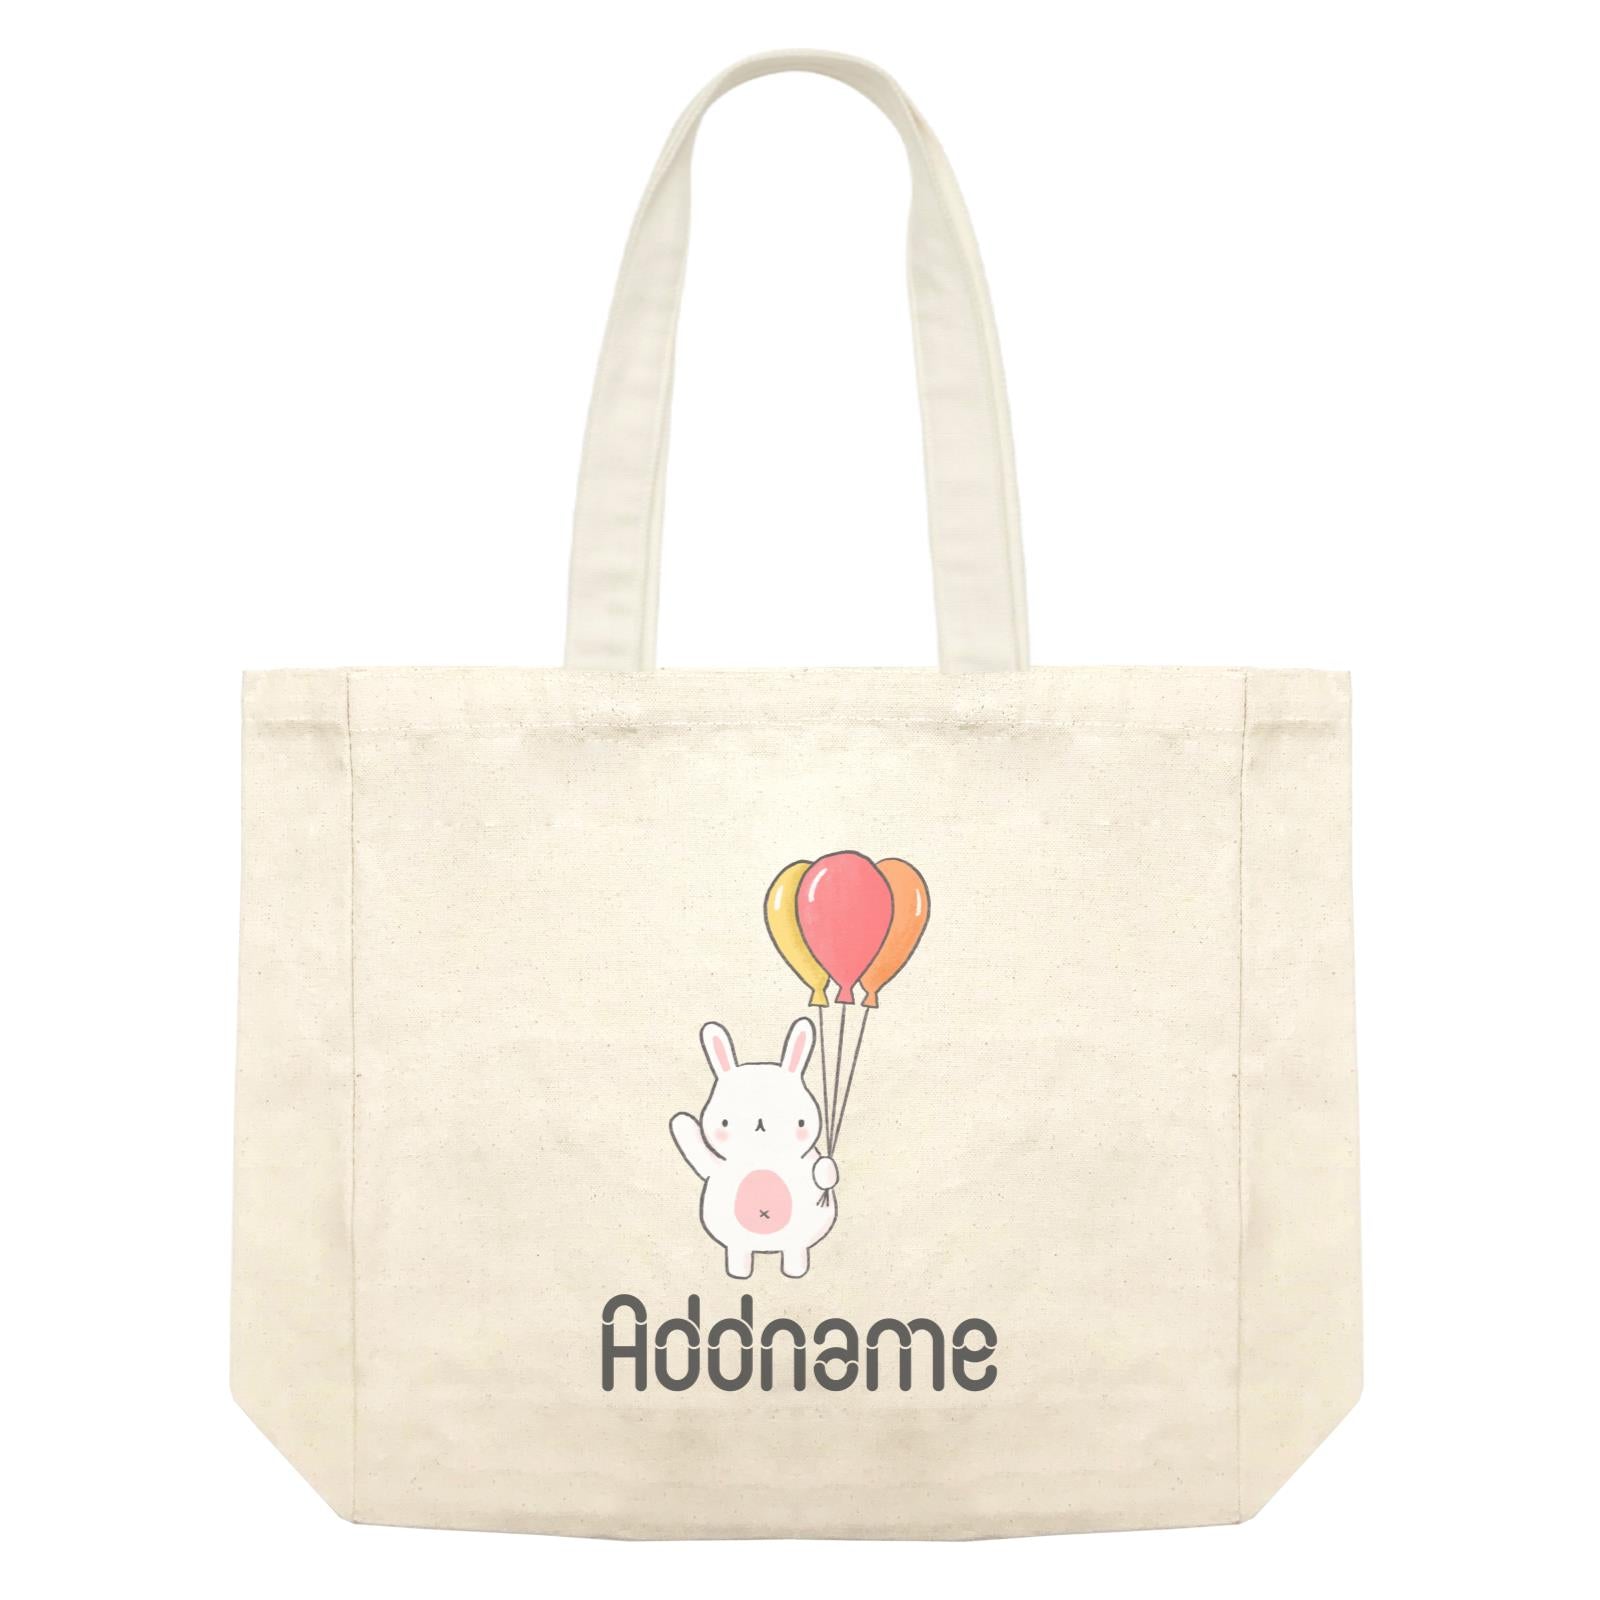 Cute Hand Drawn Style Rabbit with Balloon Addname Shopping Bag